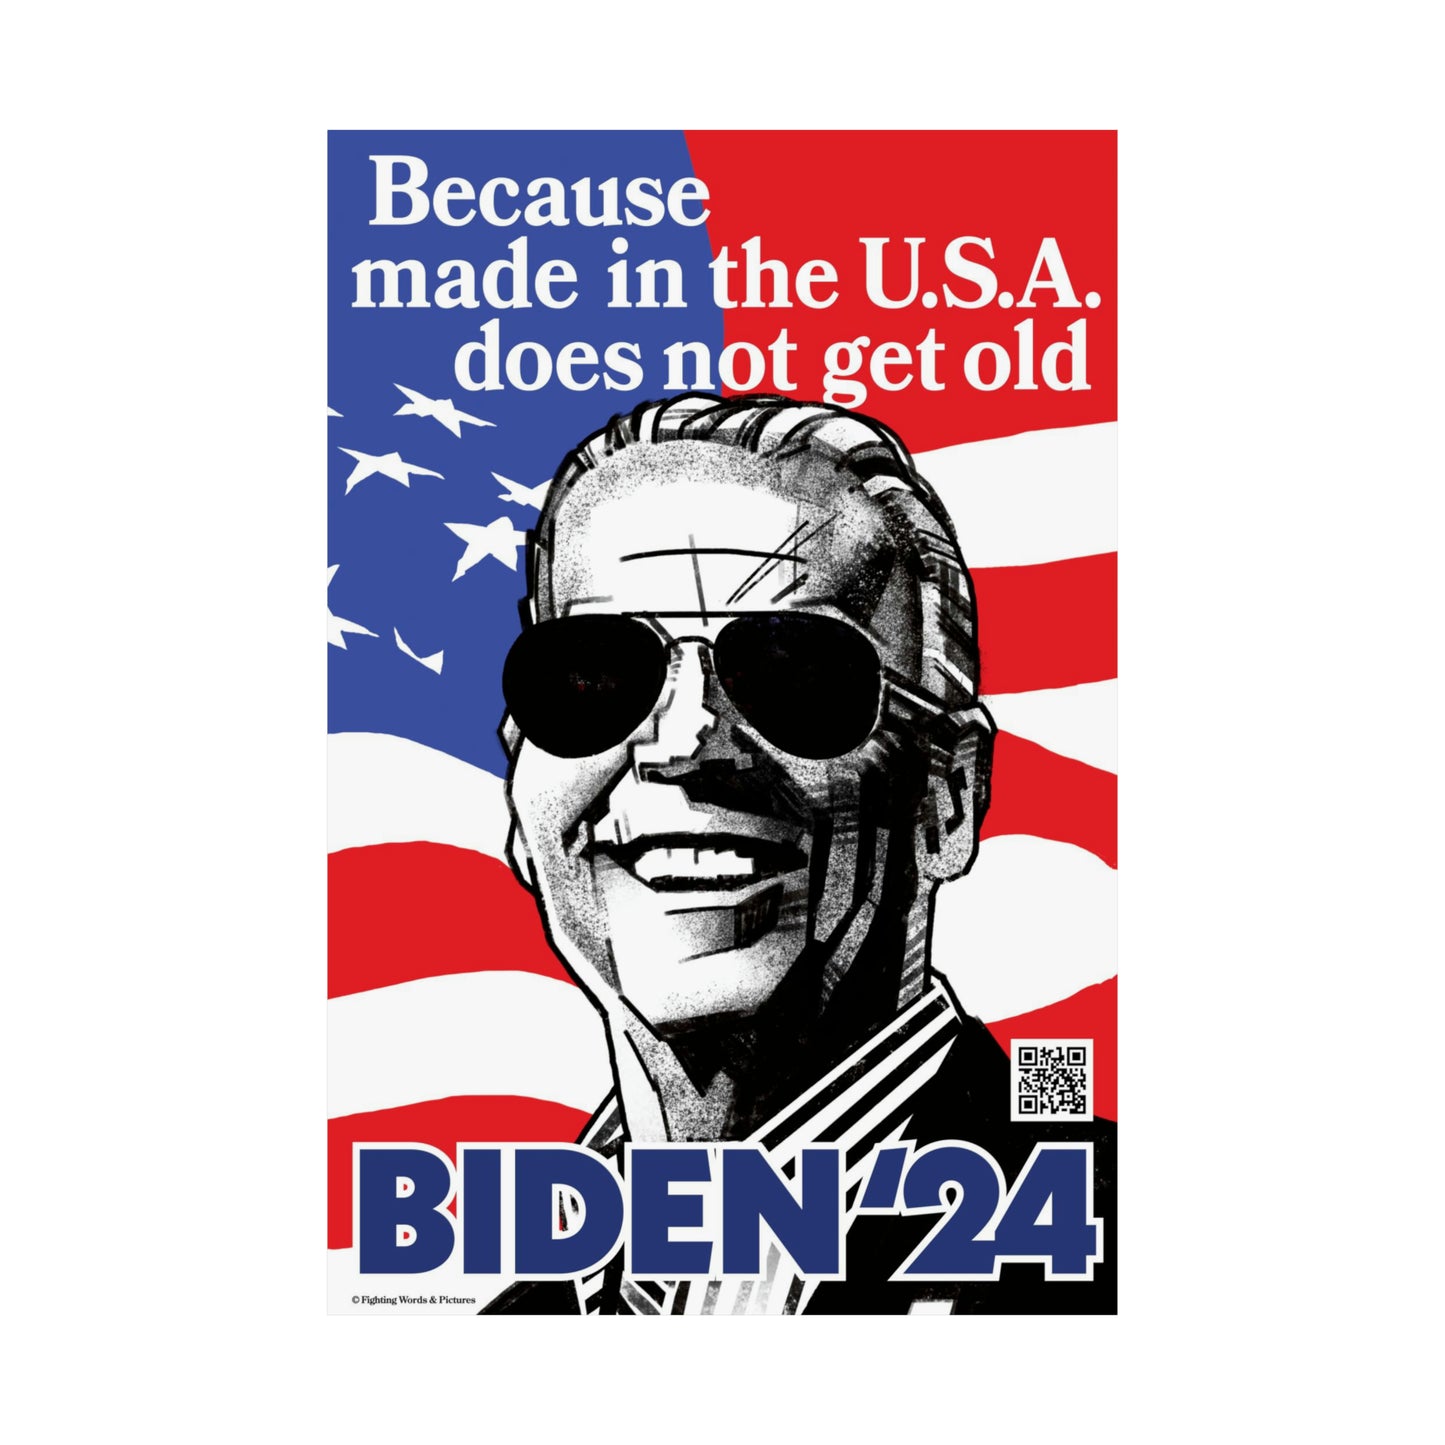 BIDEN'24 Because made in the USA does not get old Premium Matte Vertical Posters